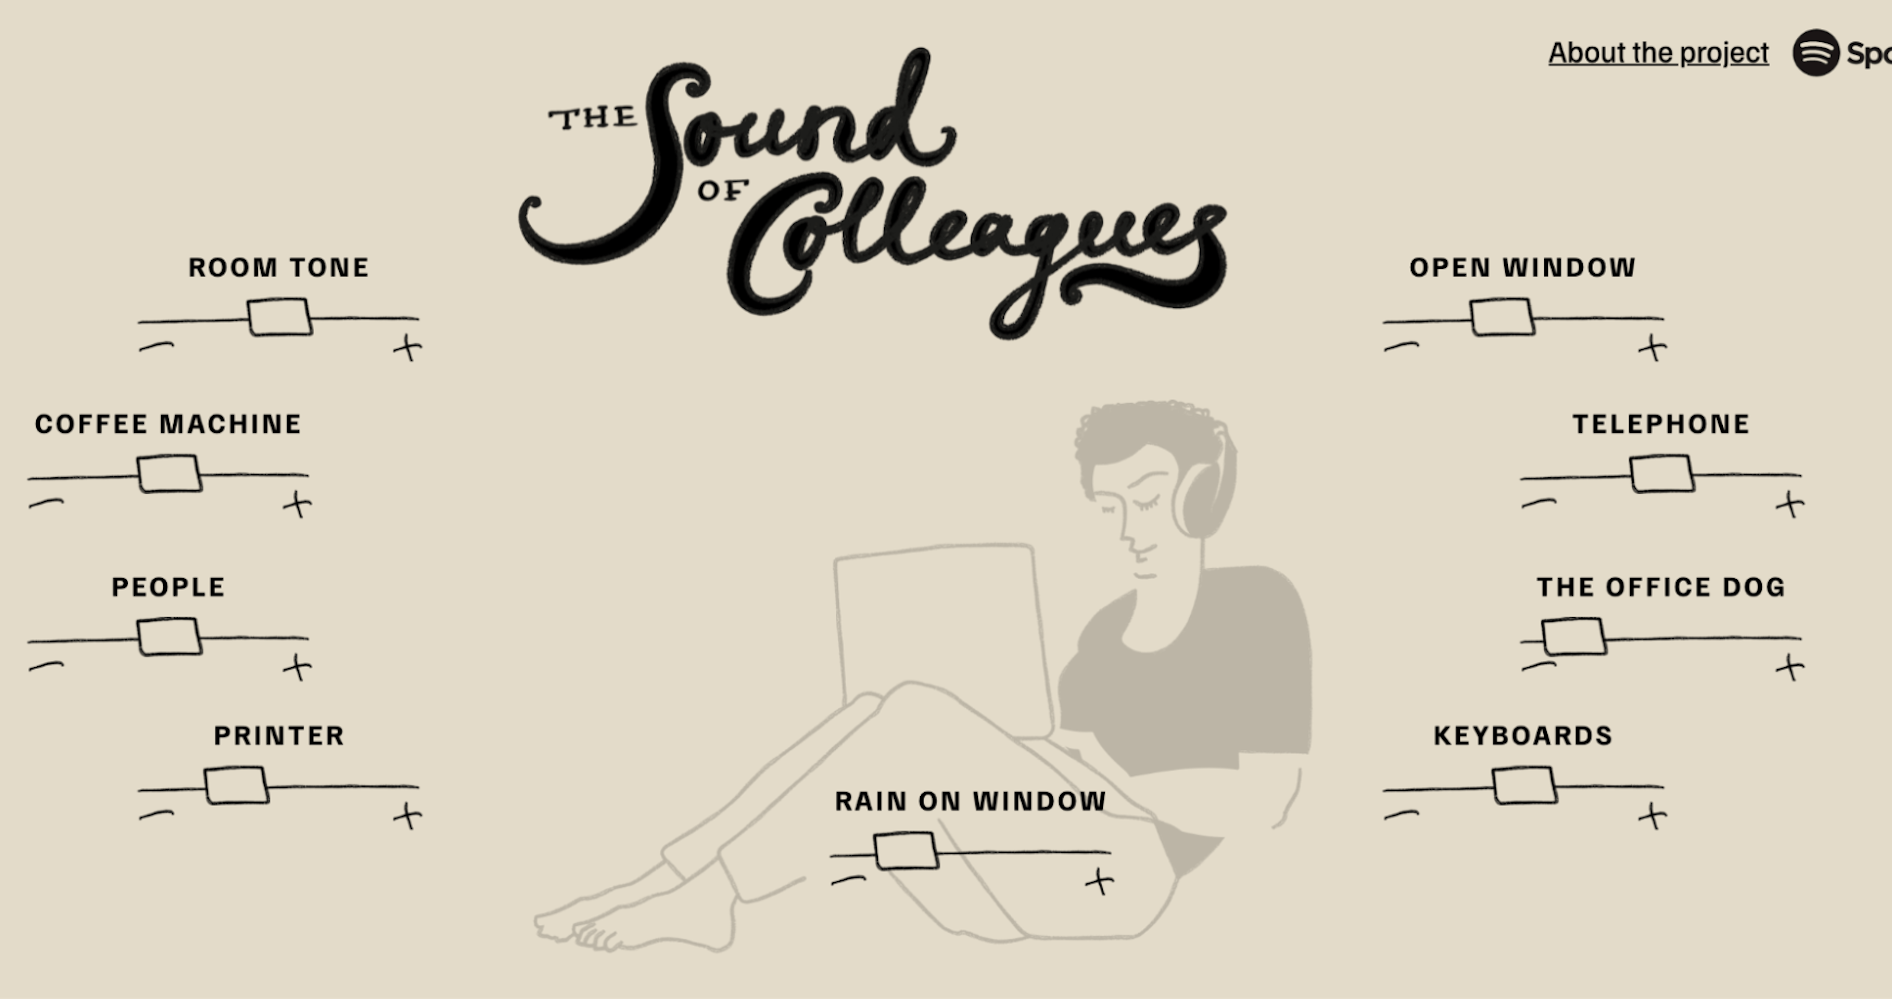 Text ad: The sound of colleagues, Spotify project.